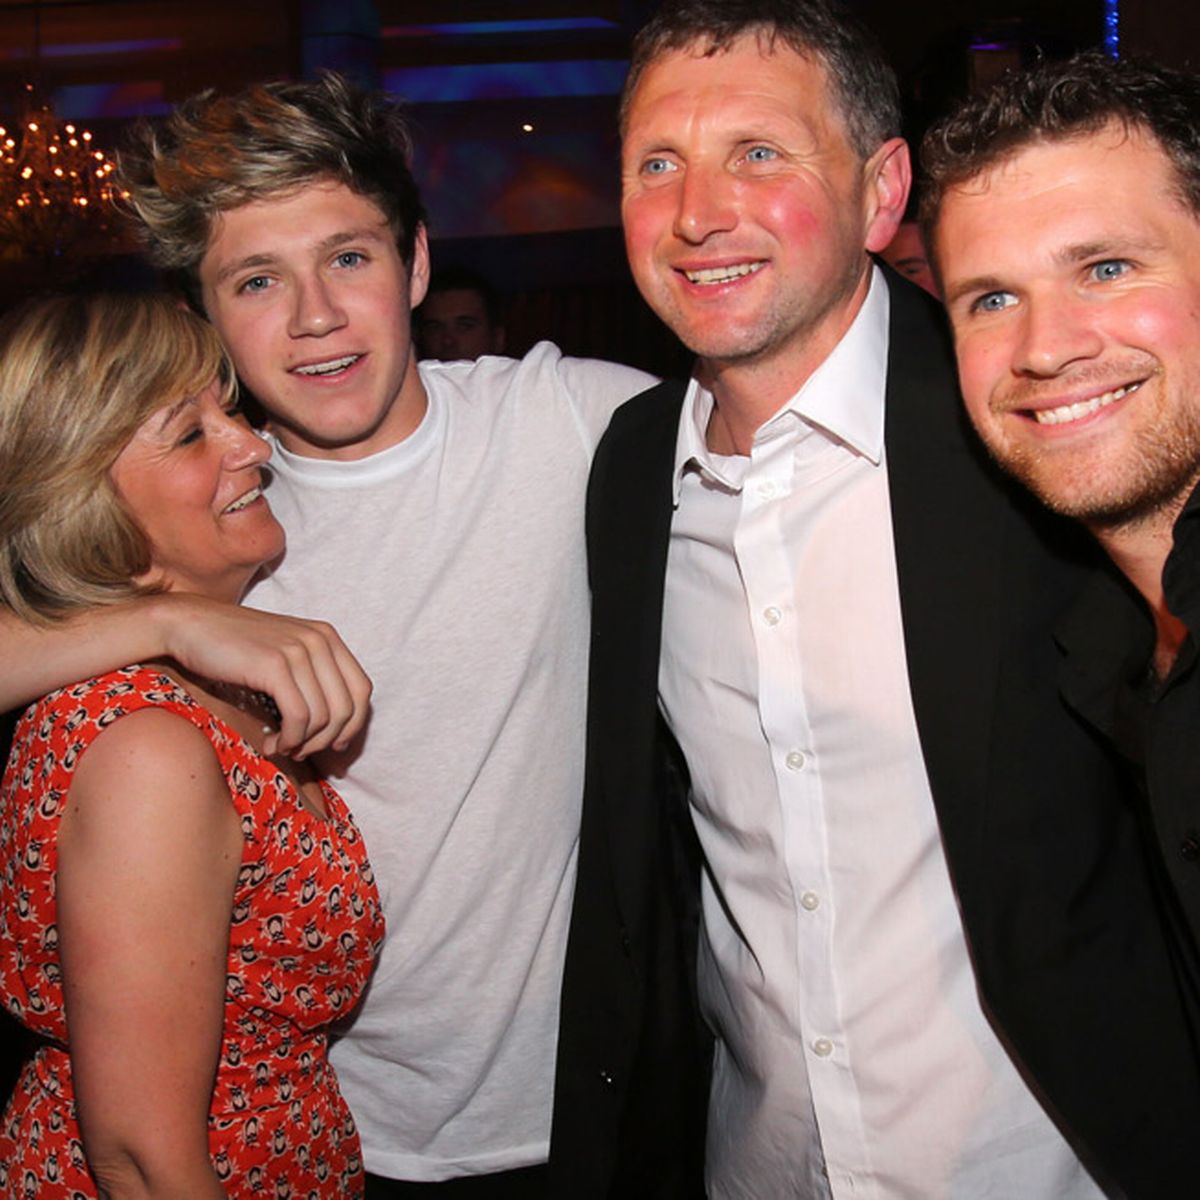 Who Is Greg Horan, Brother Of Niall Horan? Facts To Know About Greg Horan Wife And Parents